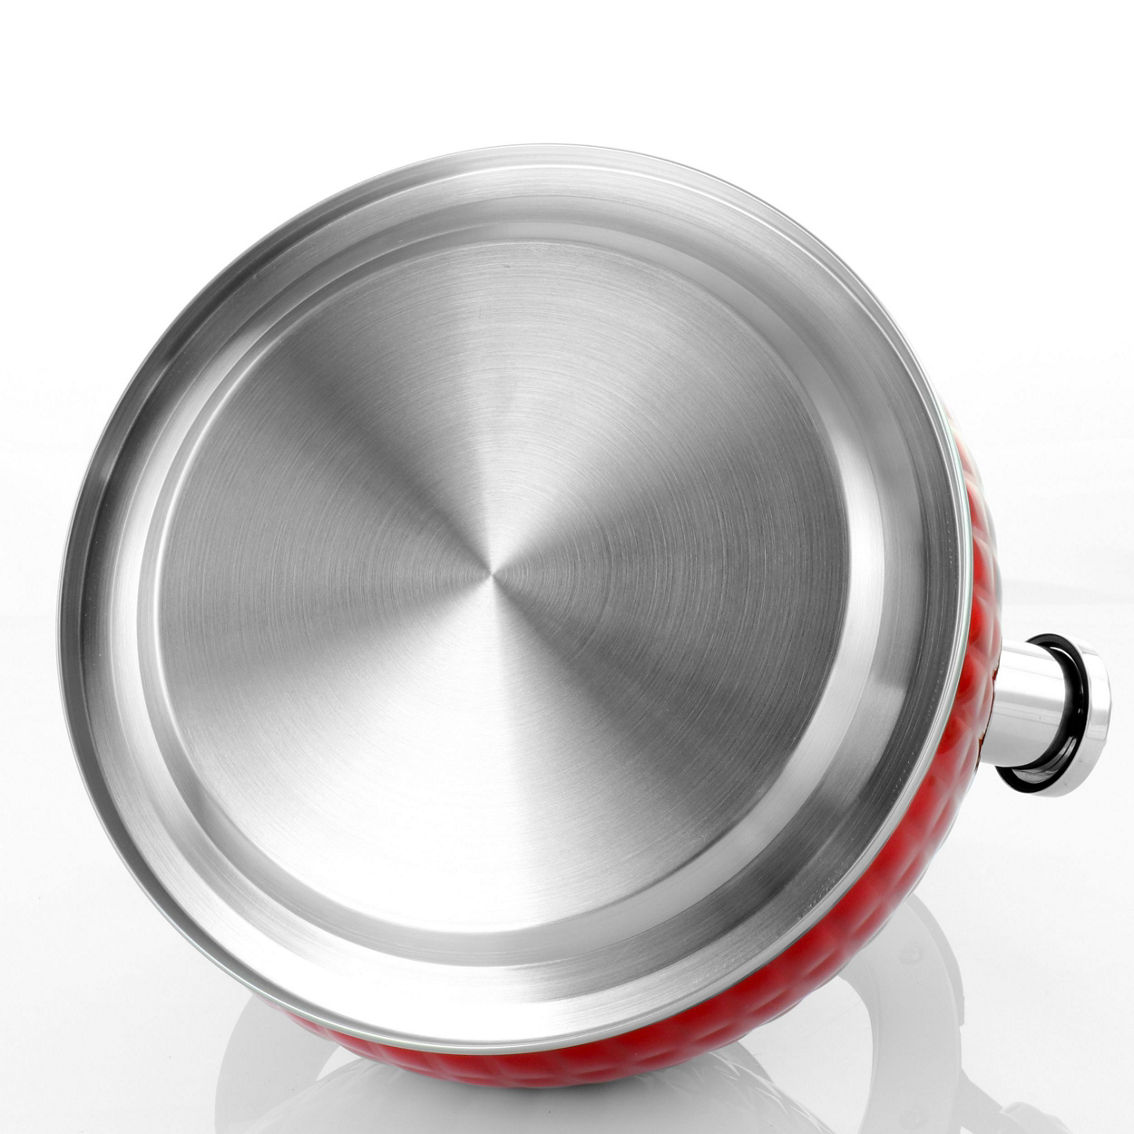 MegaChef 3 Liter Stovetop Whistling Kettle in Red - Image 4 of 5